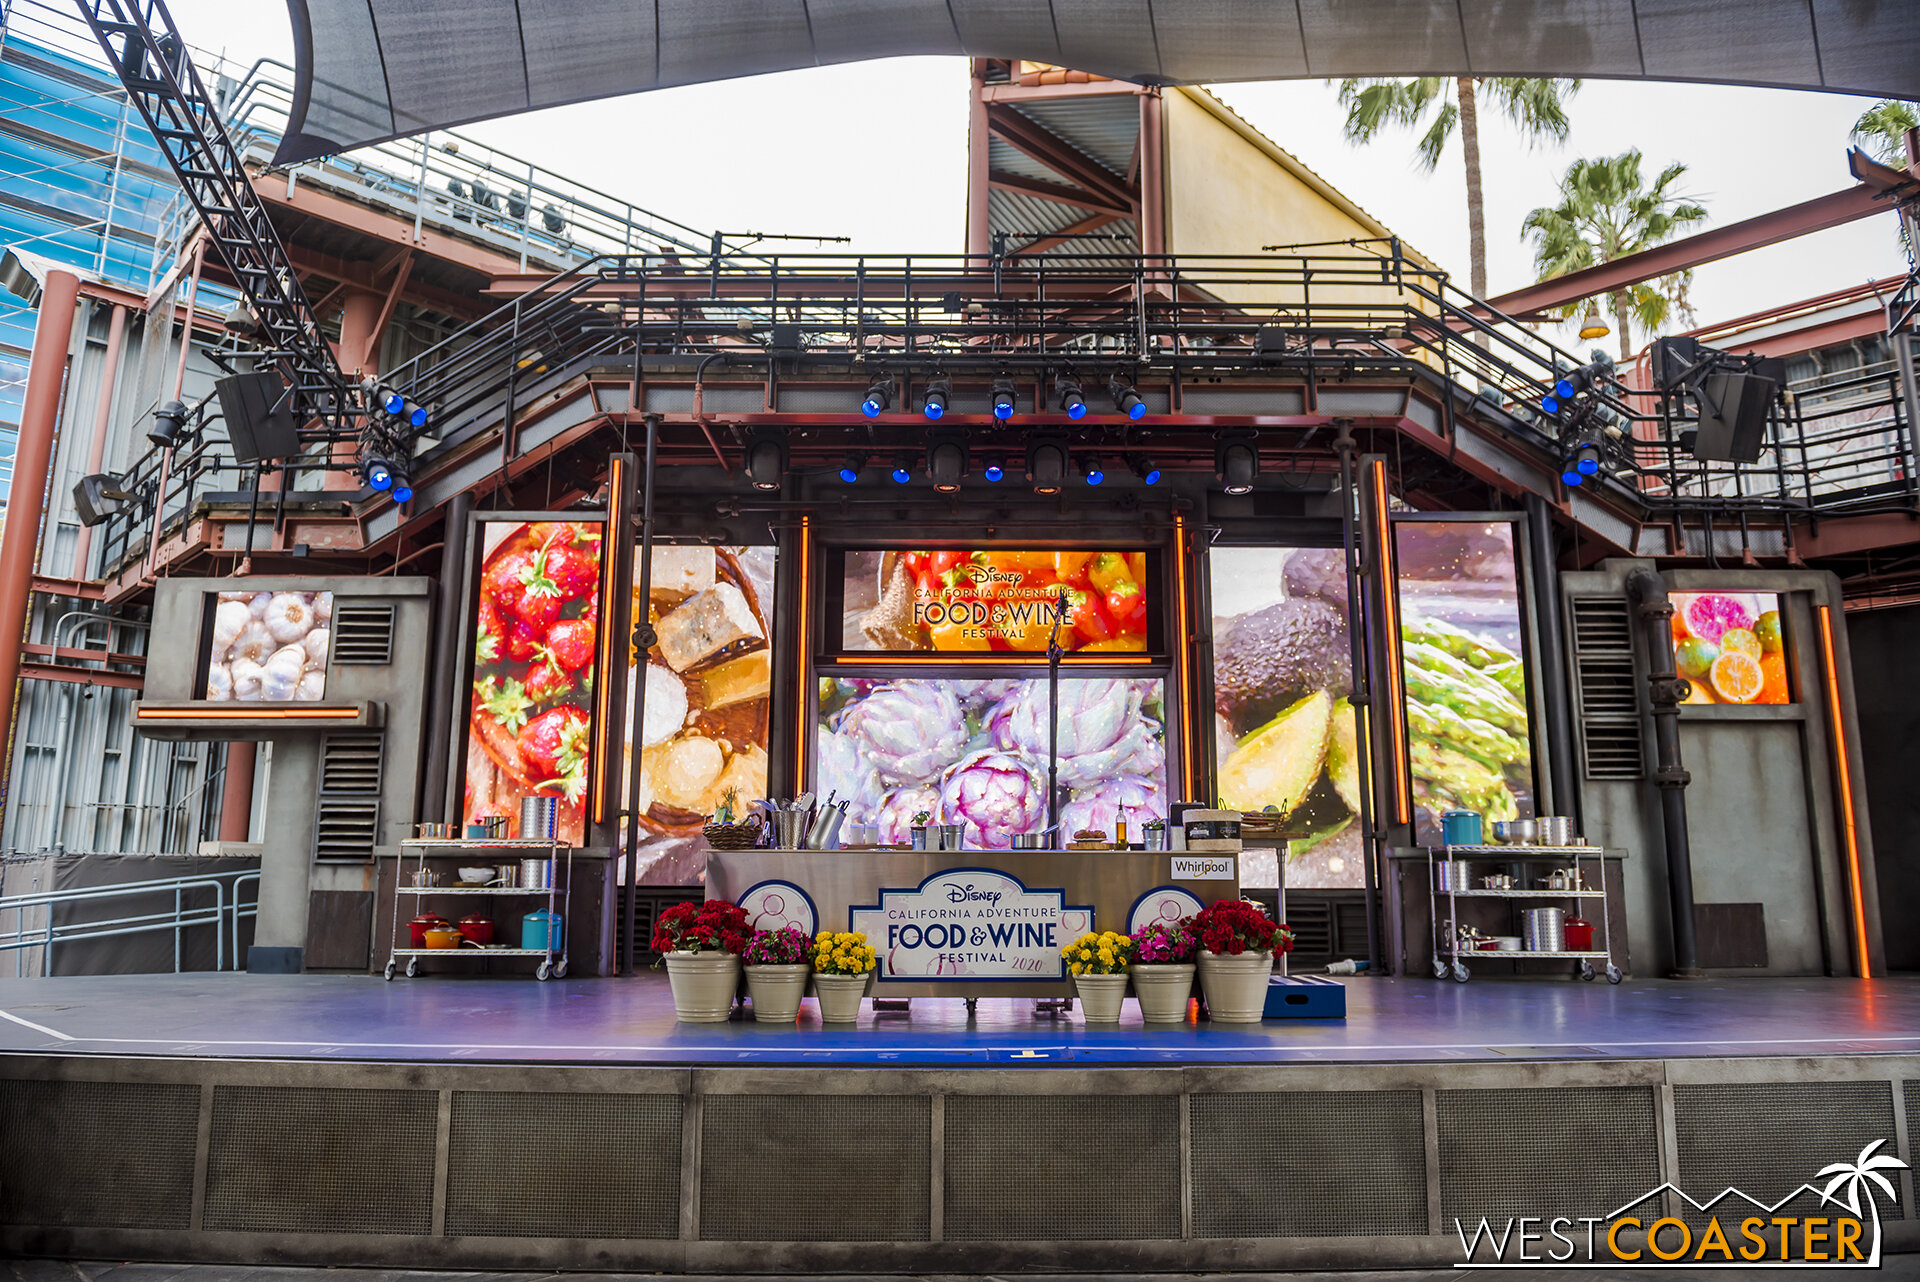  The stage in the backlot is home to cooking and food segments that anyone can spectate. 